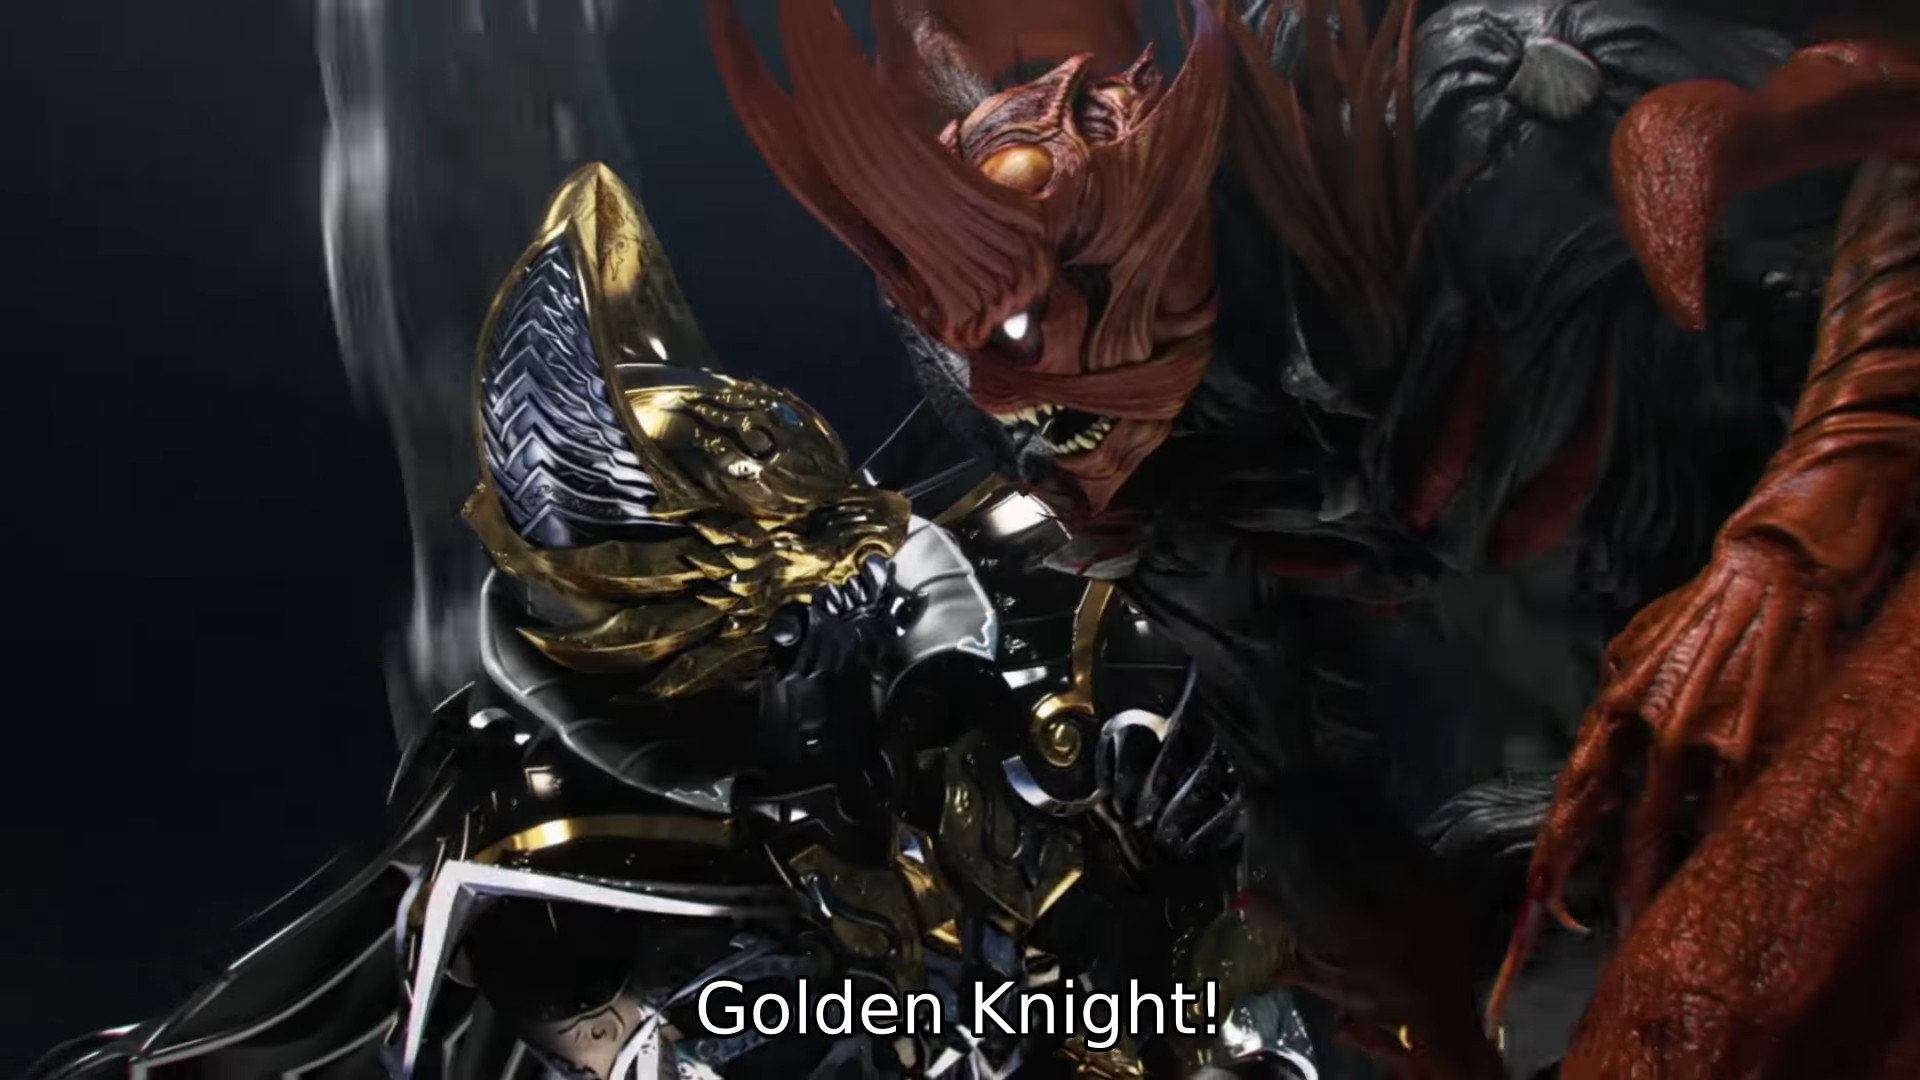 Three generations of the Golden Knight